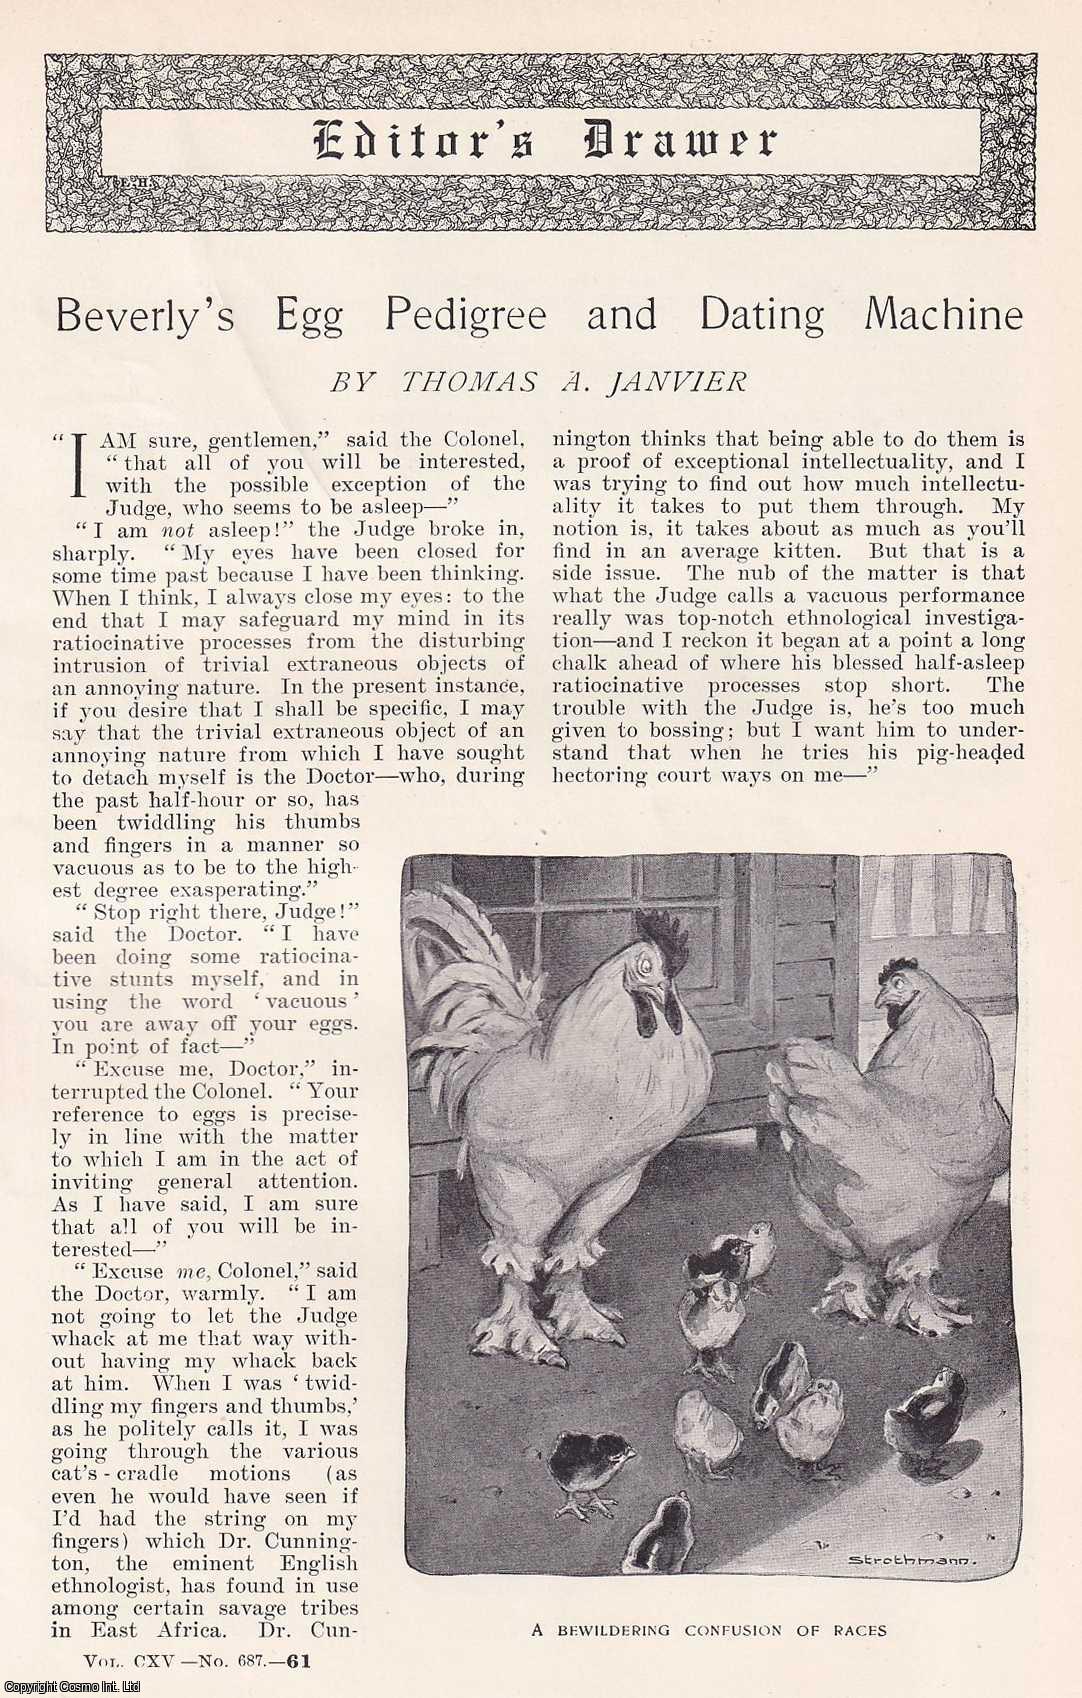 CHICKEN HUMOUR - Beverly's Egg Pedigree and Dating Machine. By Thomas A. Janvier. Illustrated by Frederick Strothmann. An original article from the Harper's Monthly Magazine, 1907.